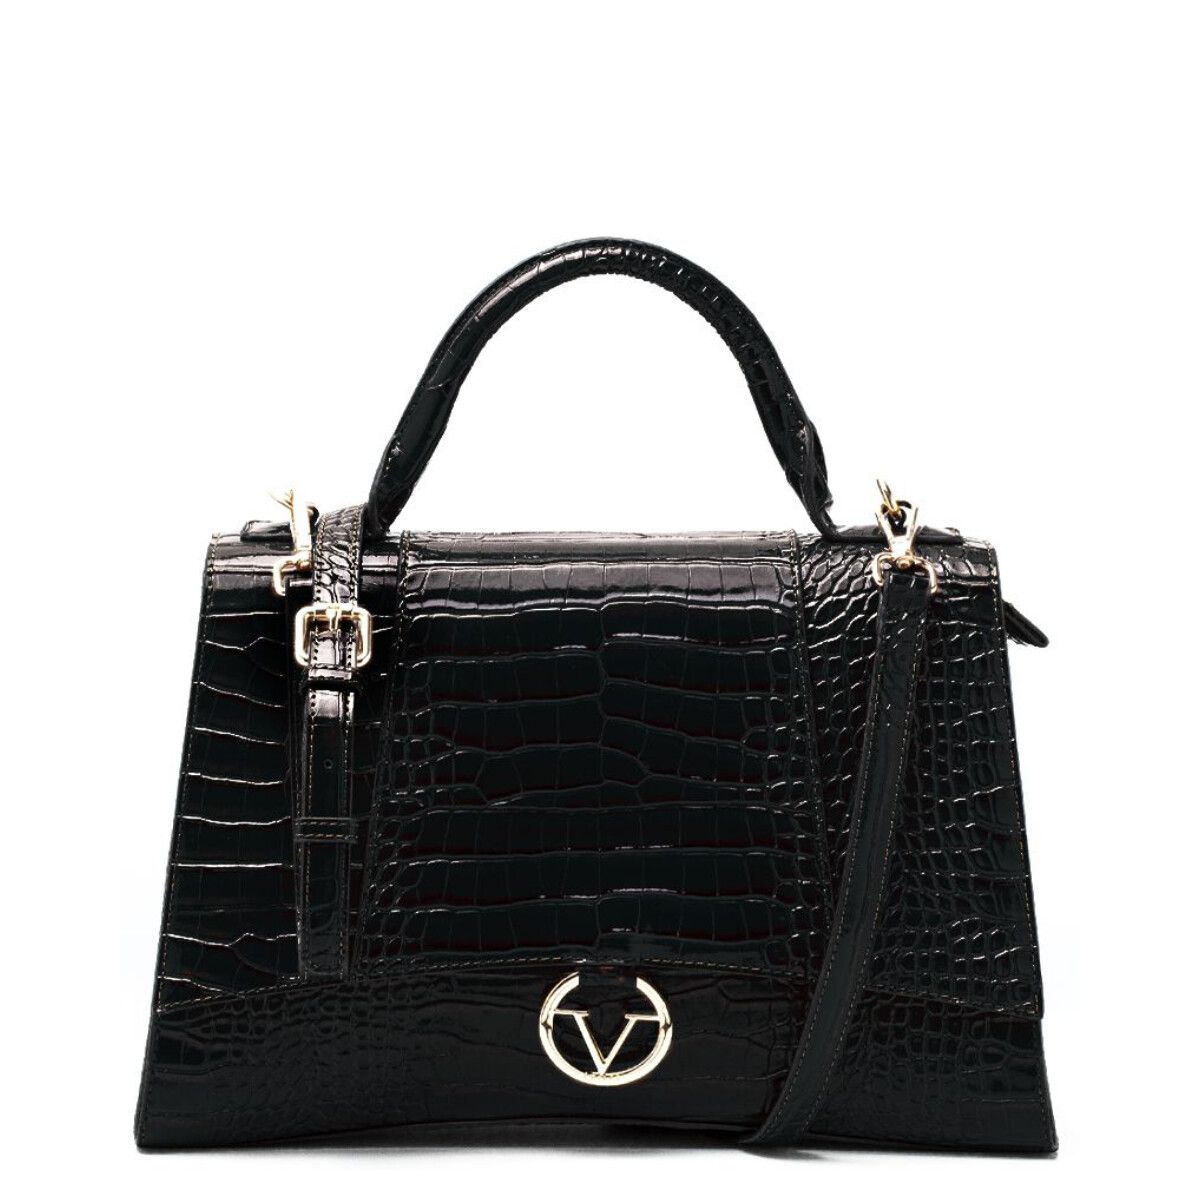 Brand: 19v69 Italia Gender: Women Type: Bags Season: Fall/Winter PRODUCT DETAIL • Color: black • Fastening: zip and automatic buttons • Pockets: inside pockets • Size (cm): 24x33x13 • Details: -handbag -with shoulder strap • Article code: VI20AI0020 COMPOSITION AND MATERIAL • Composition: -100% leather. straps:with-straps. material:woven. type:tote. occasion:everyday. gender:unisex. pattern:plain